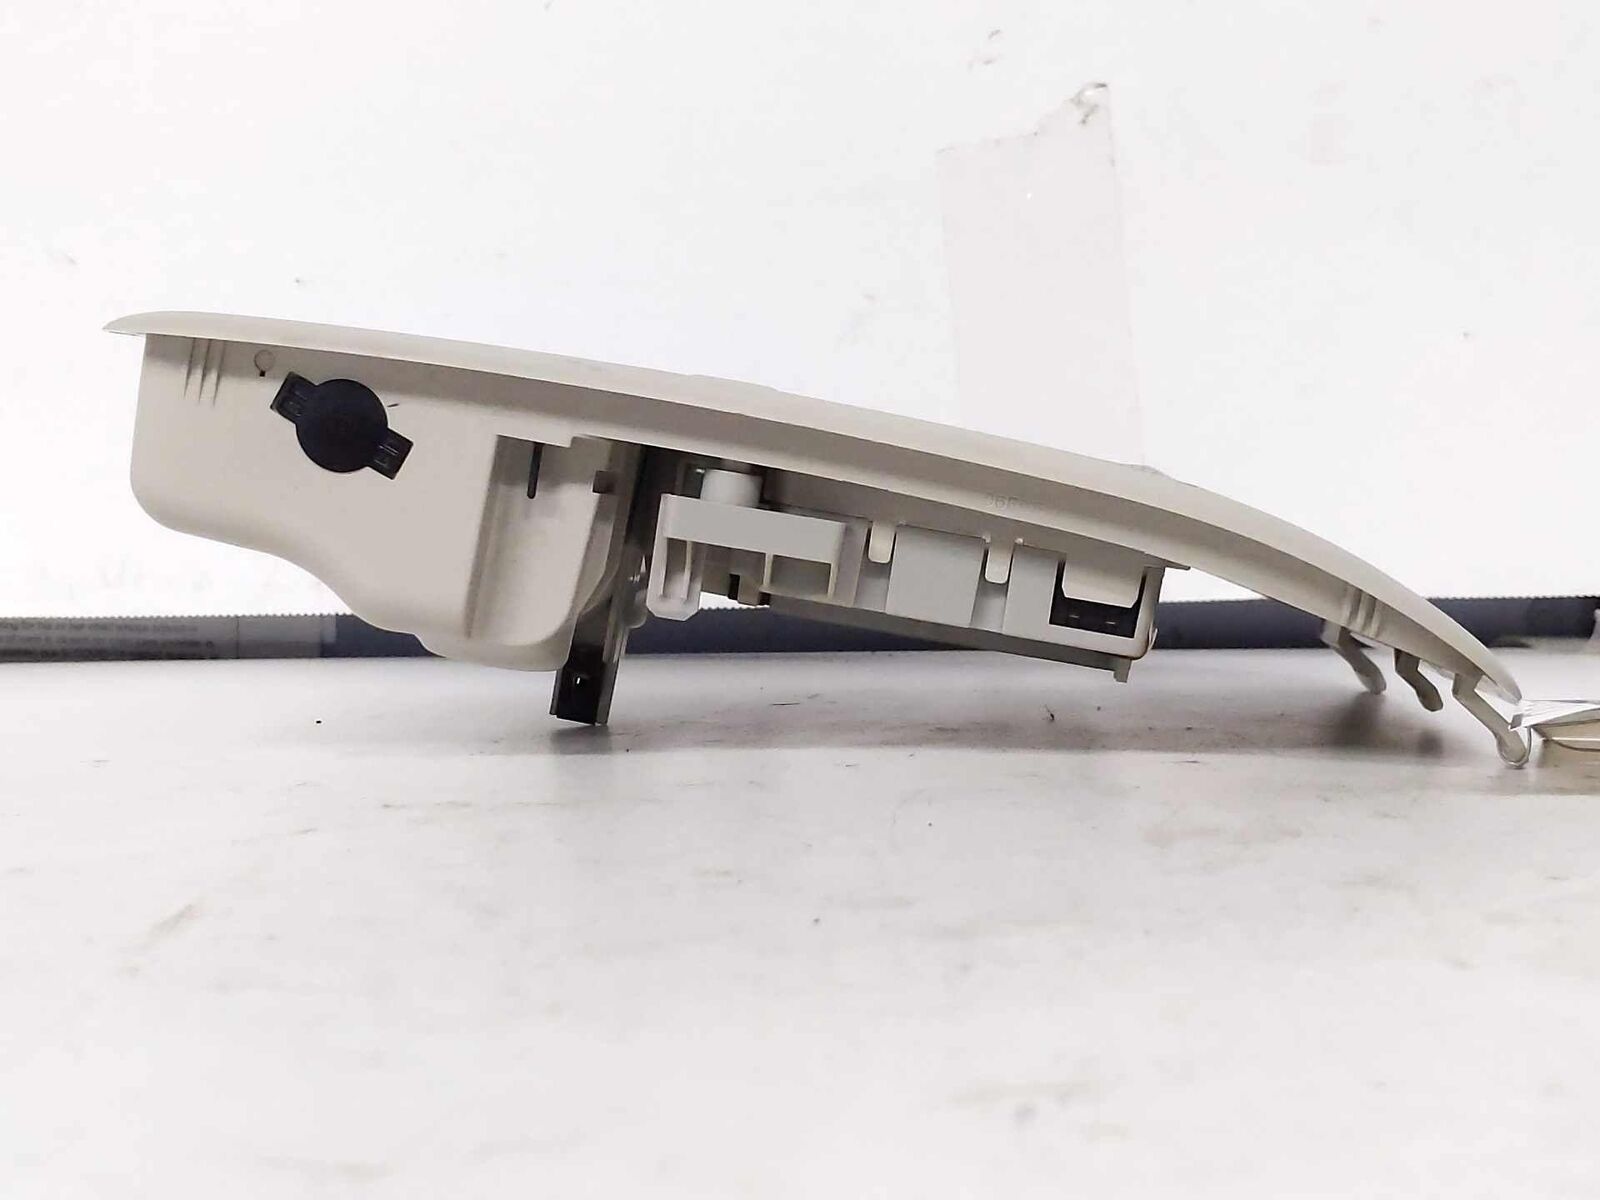 Console Front Roof OEM MAZDA 6 14 15 16 17